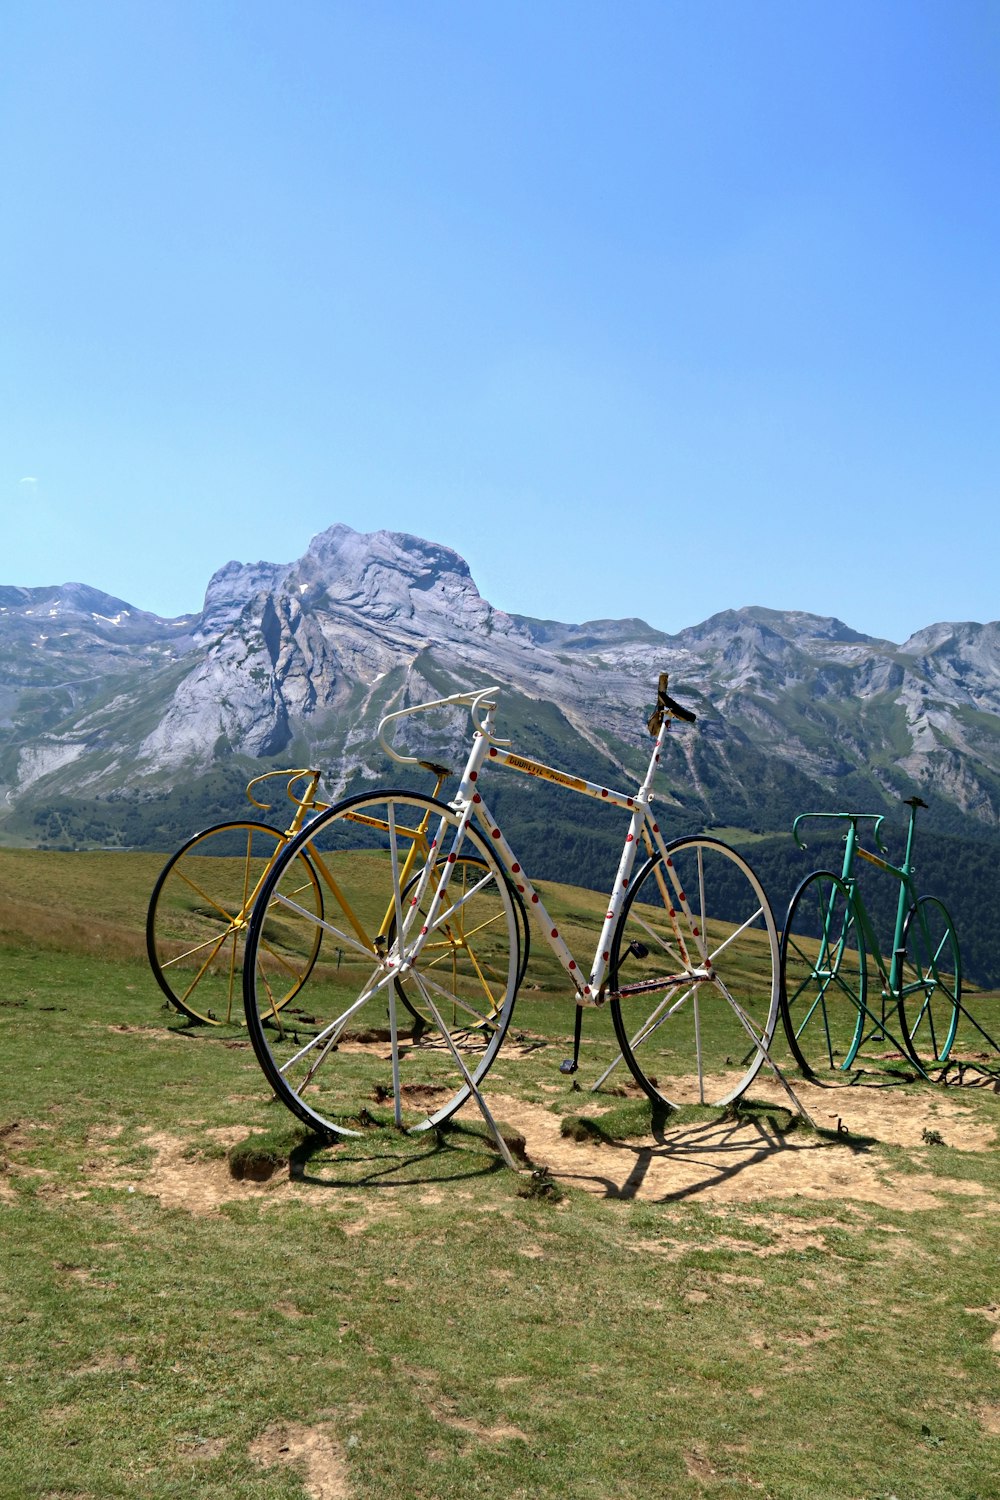 black bicycle on green grass field near mountain during daytime